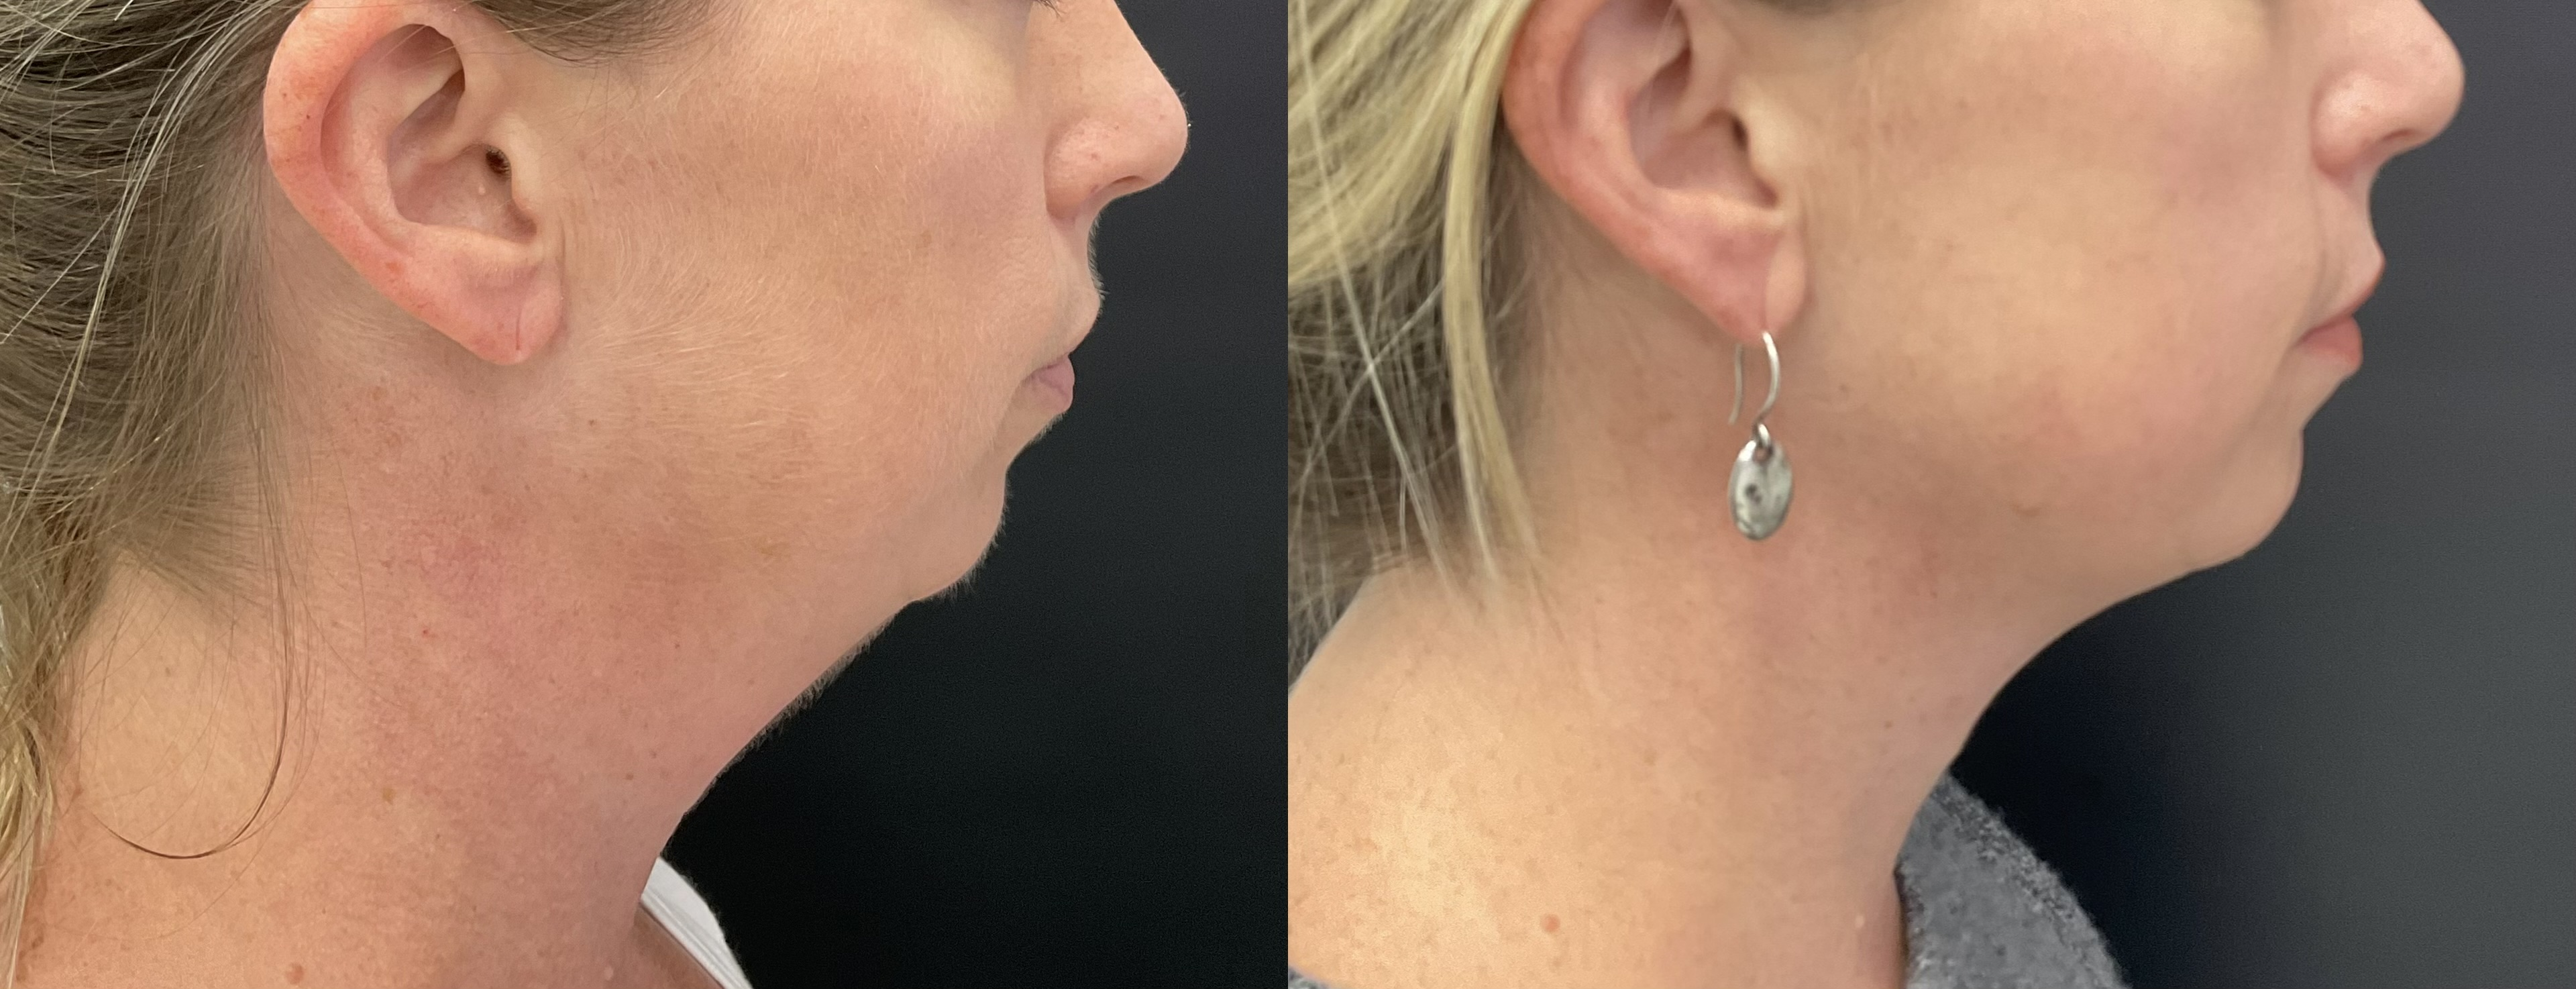 2 sessions of Coolsculpting Chin